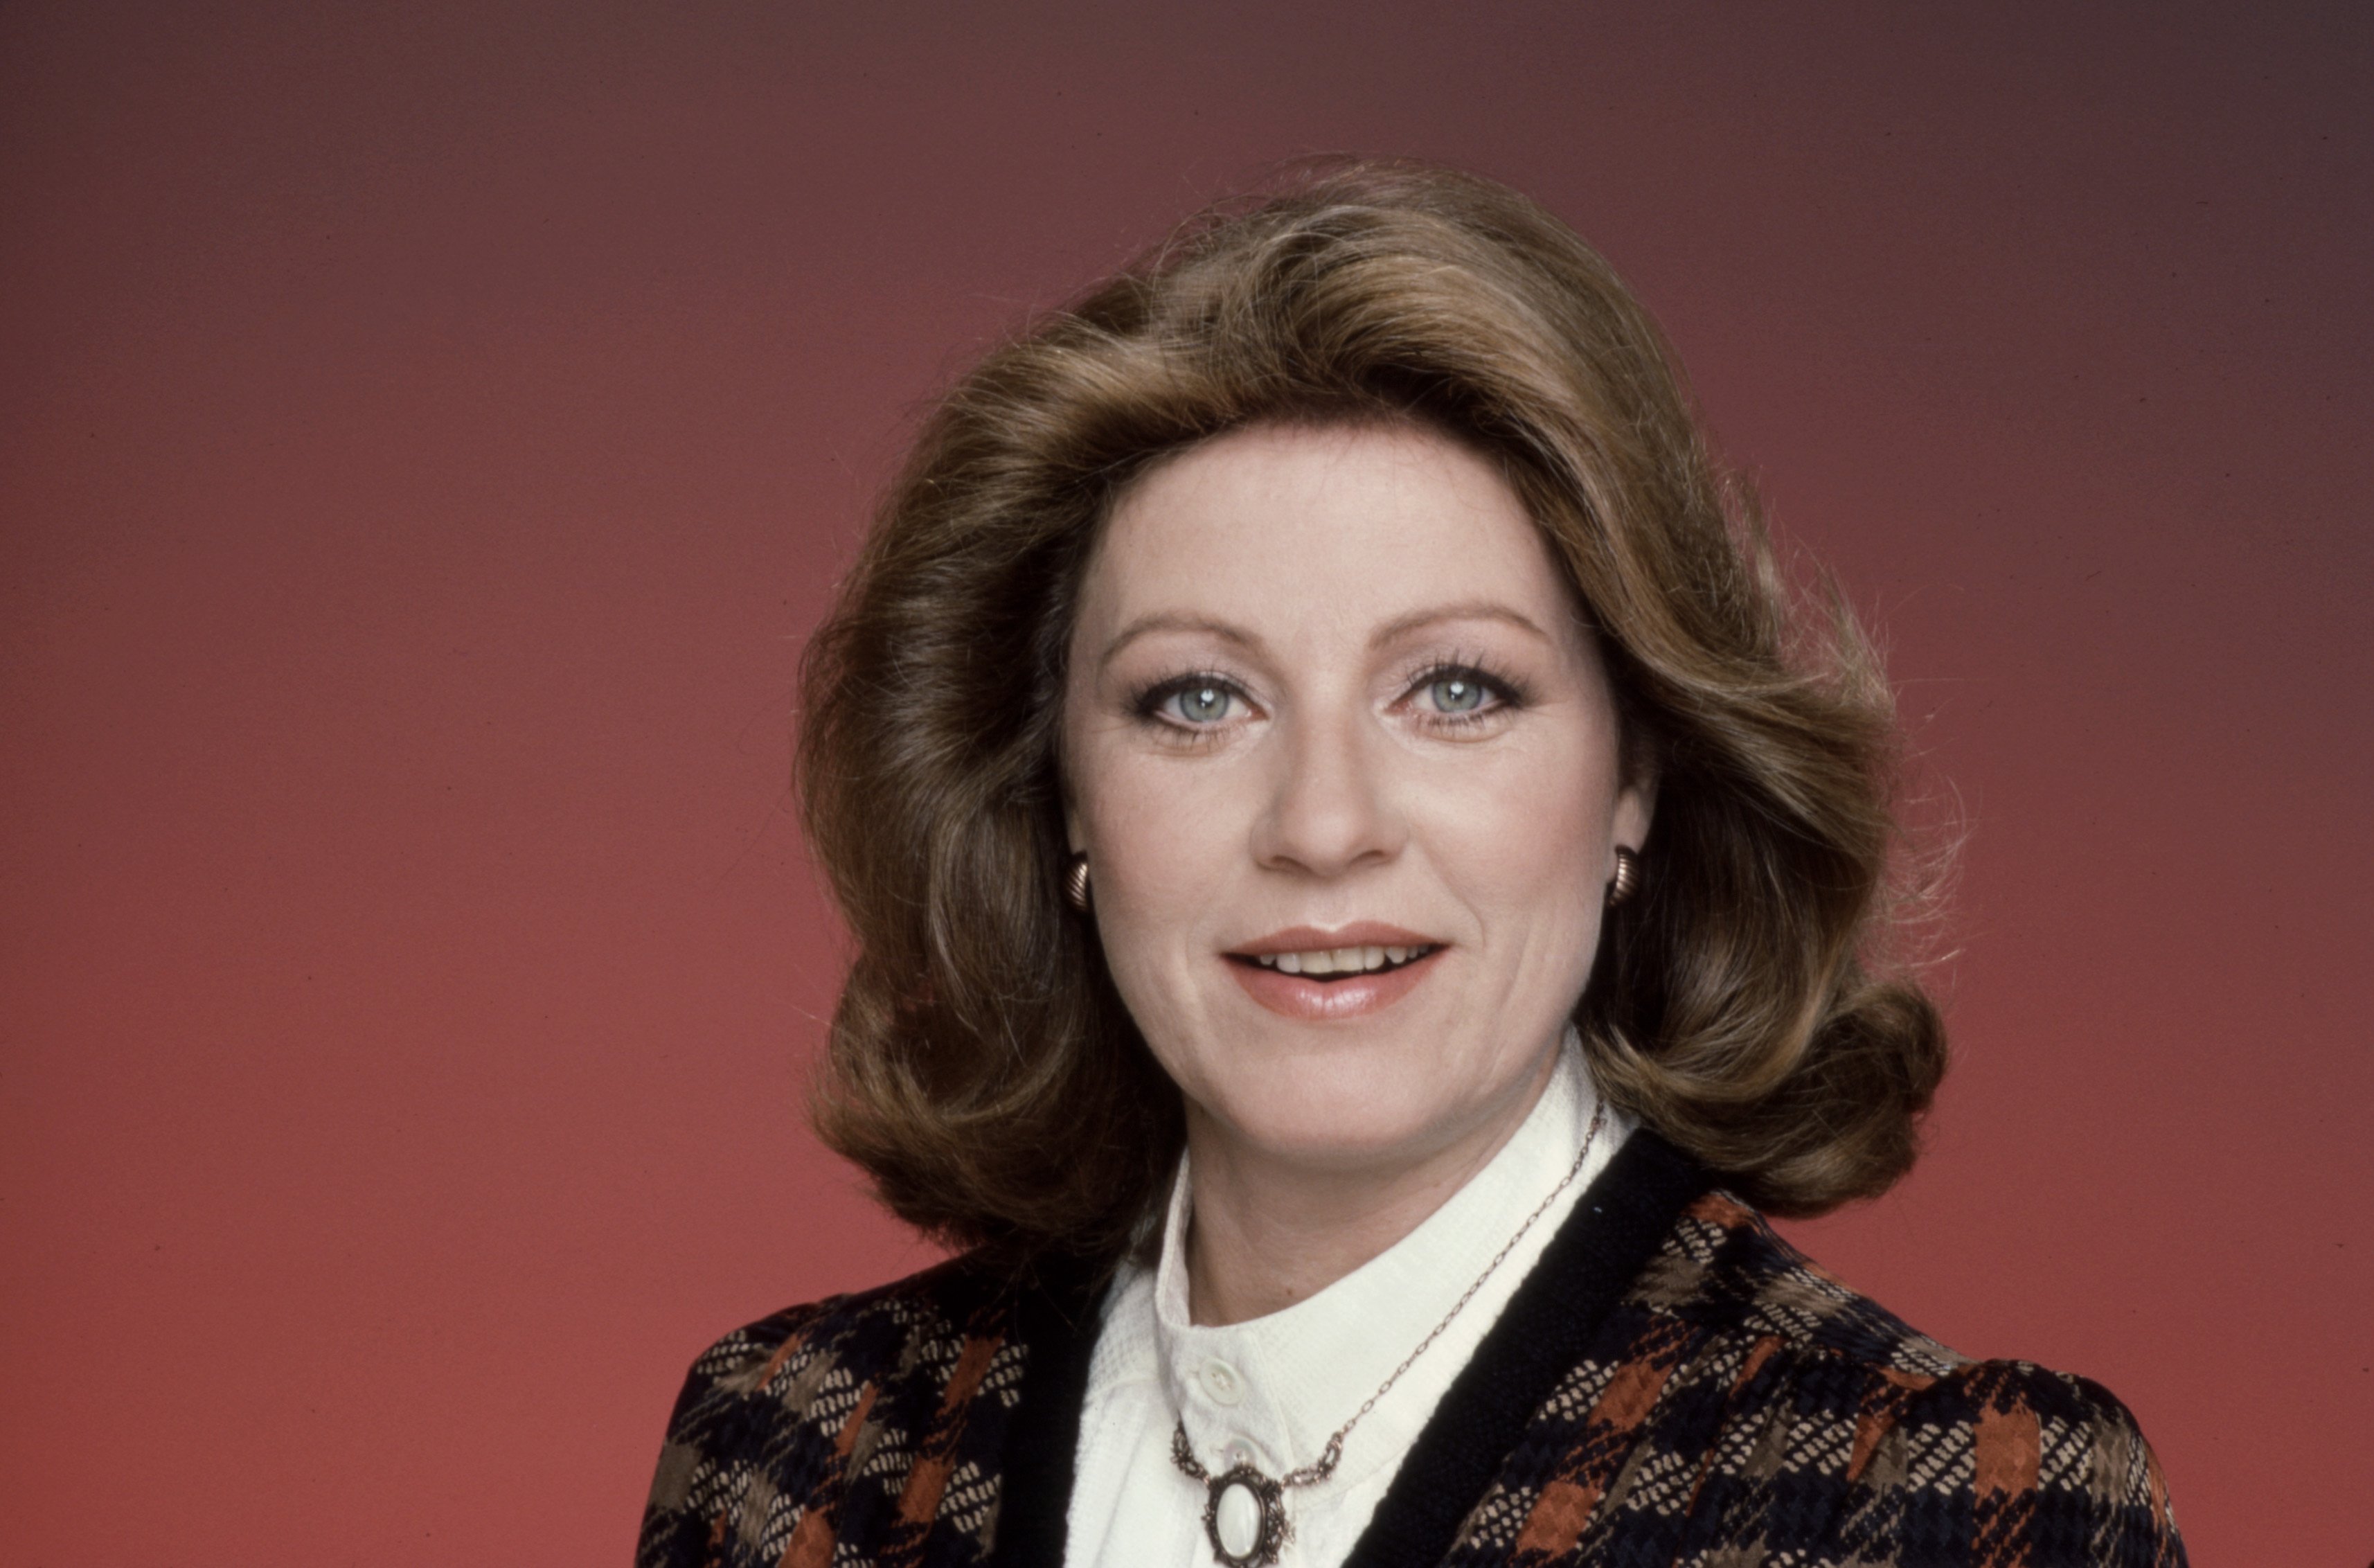 Promotional photo of Patty Duke for "Hail to the Chief" circa 1985. | Source: Getty Images